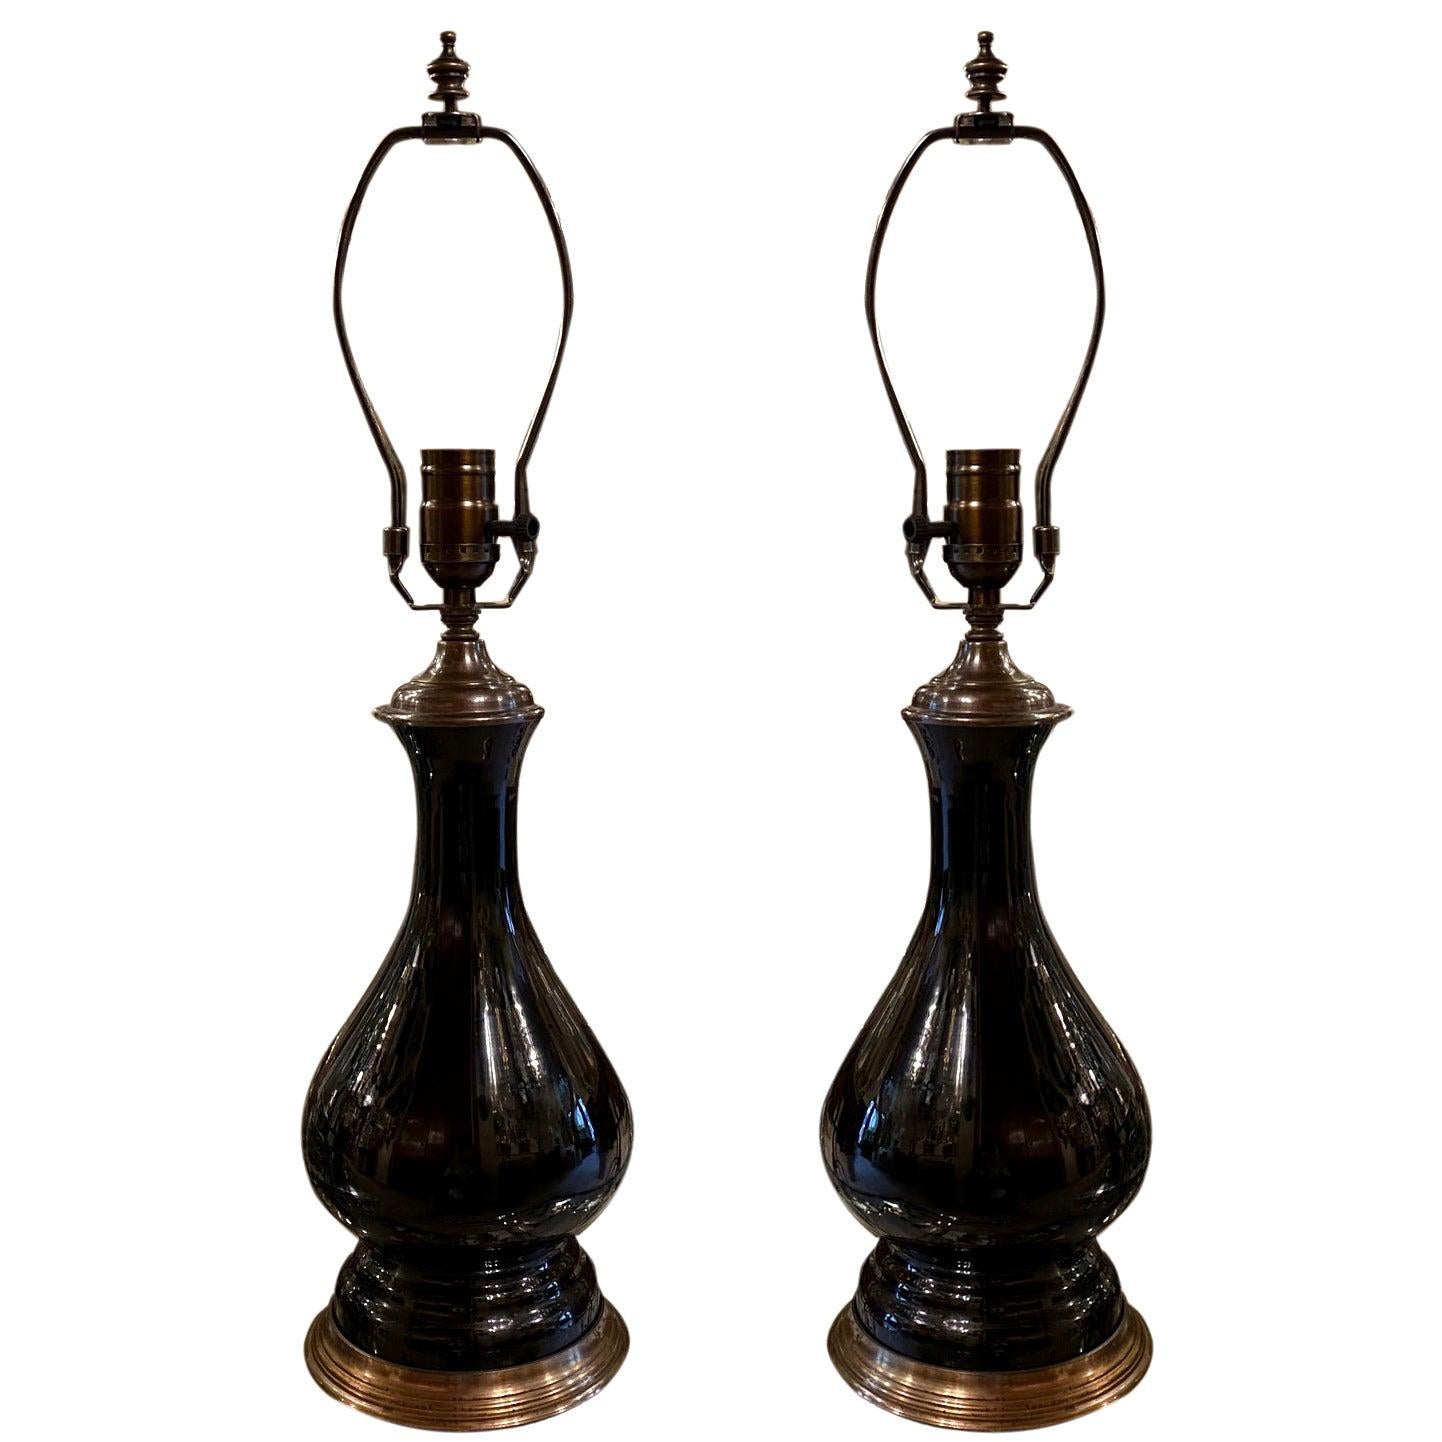 Pair of Electrified Black Glass Lamps